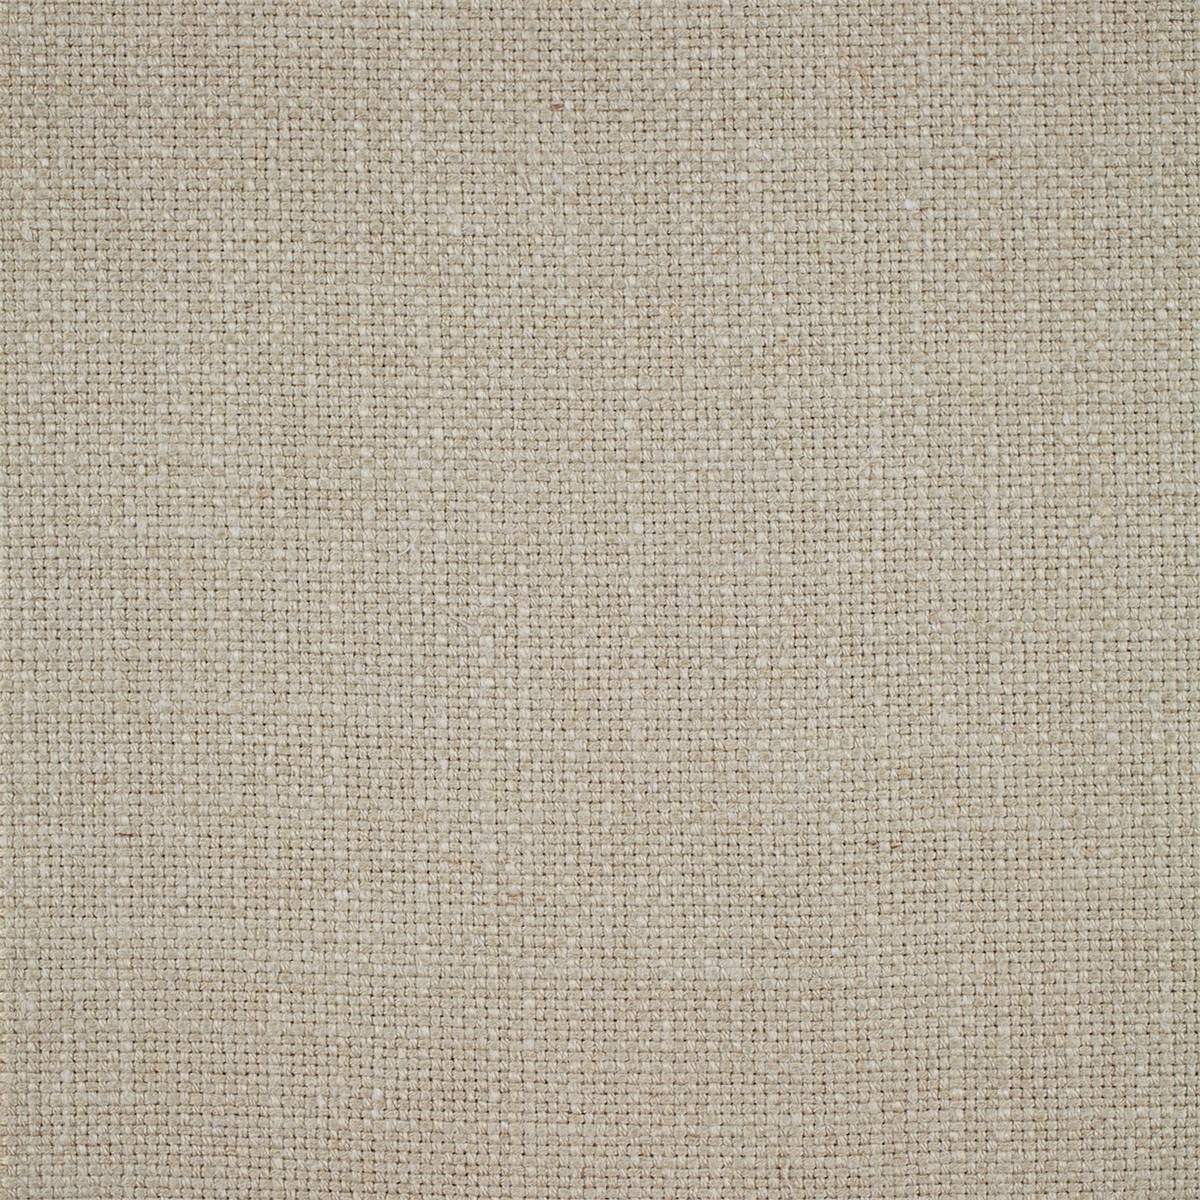 Tuscany Parchment Fabric by Sanderson